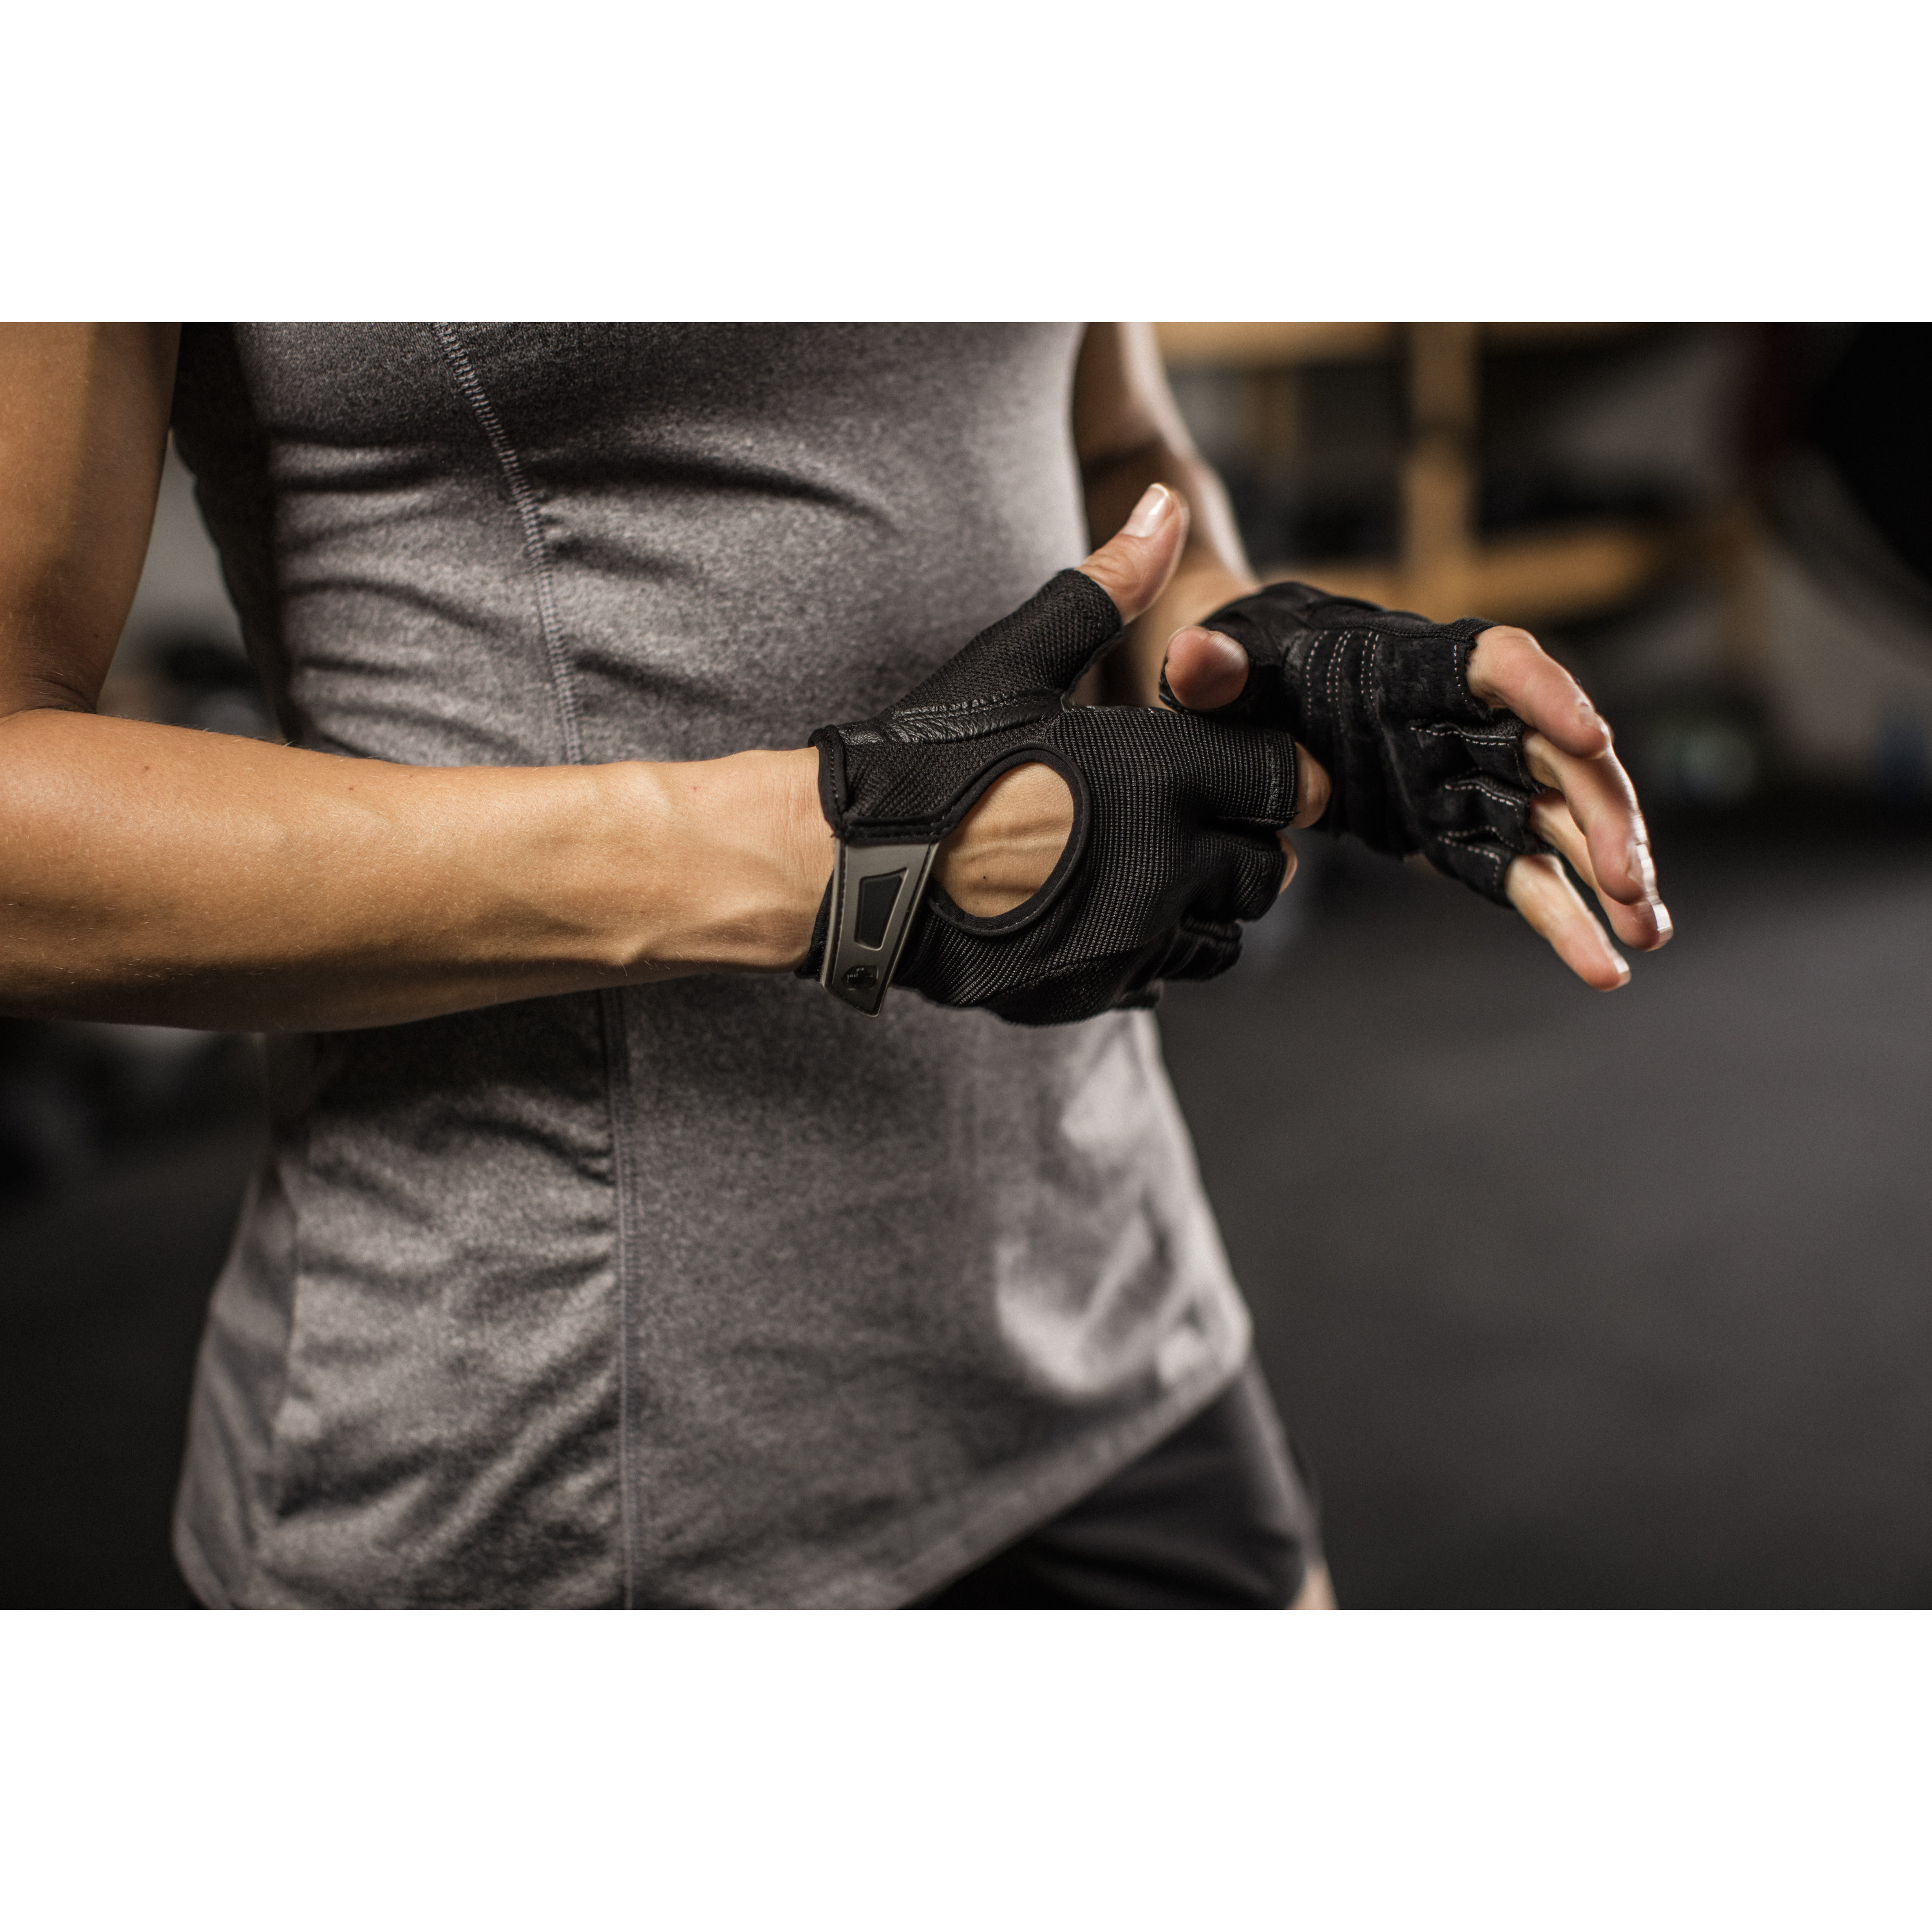 Harbinger Women's Power Weightlifting Gloves with StretchBack Mesh and Leather Palm (Pair) (2017 Model), Medium - image 3 of 5